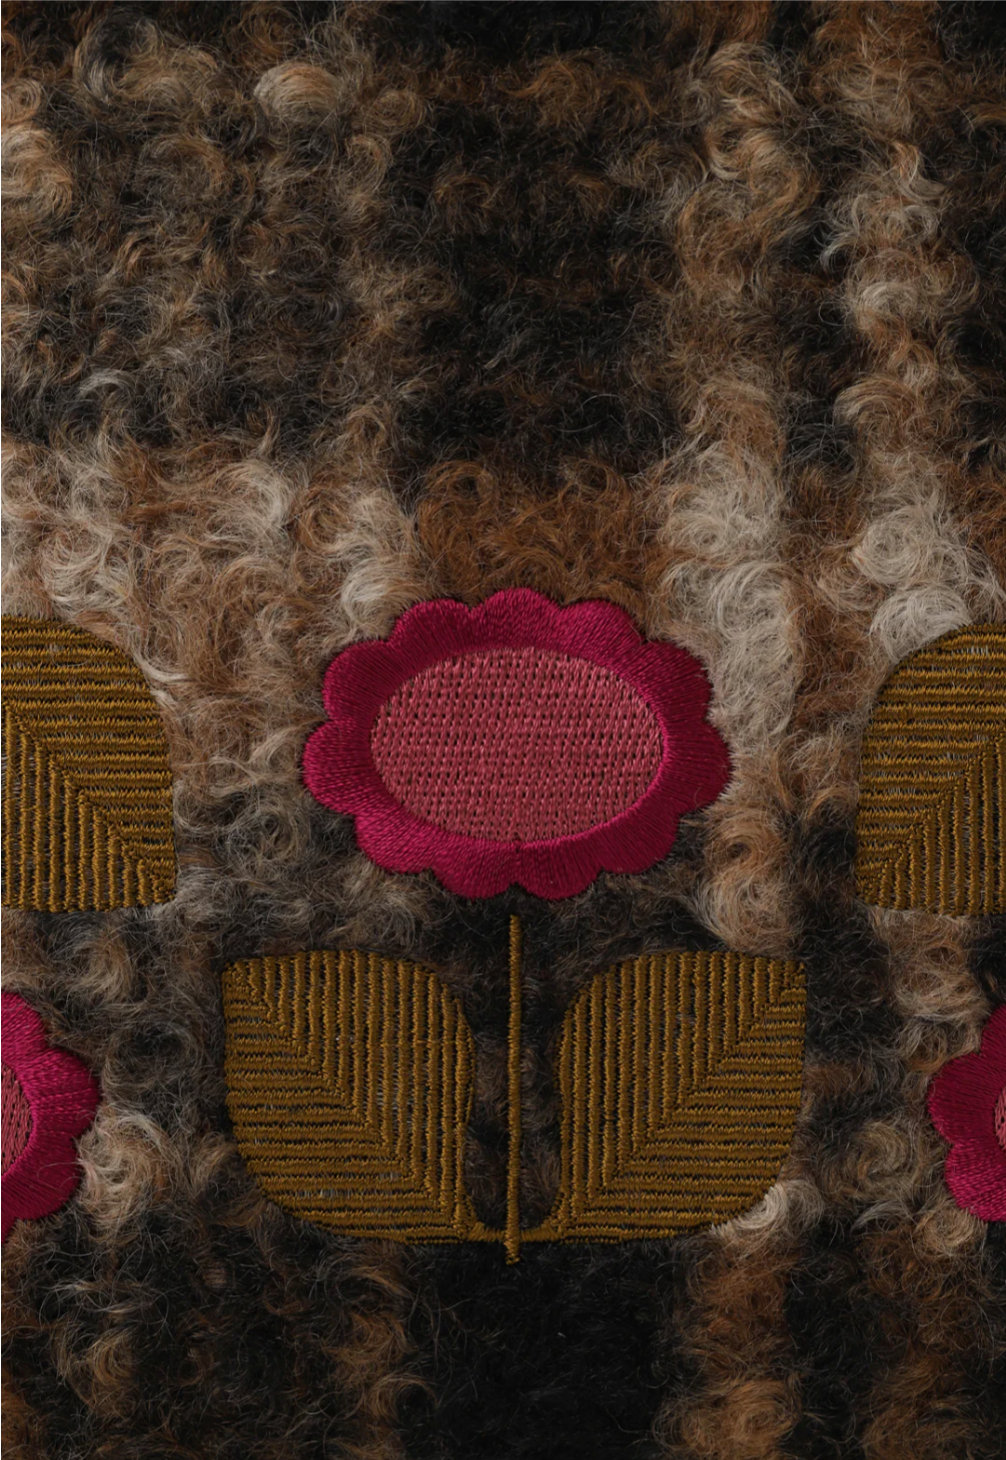 Detail of the red and pink Daisy motif is overlaid on a brown plaid fur print